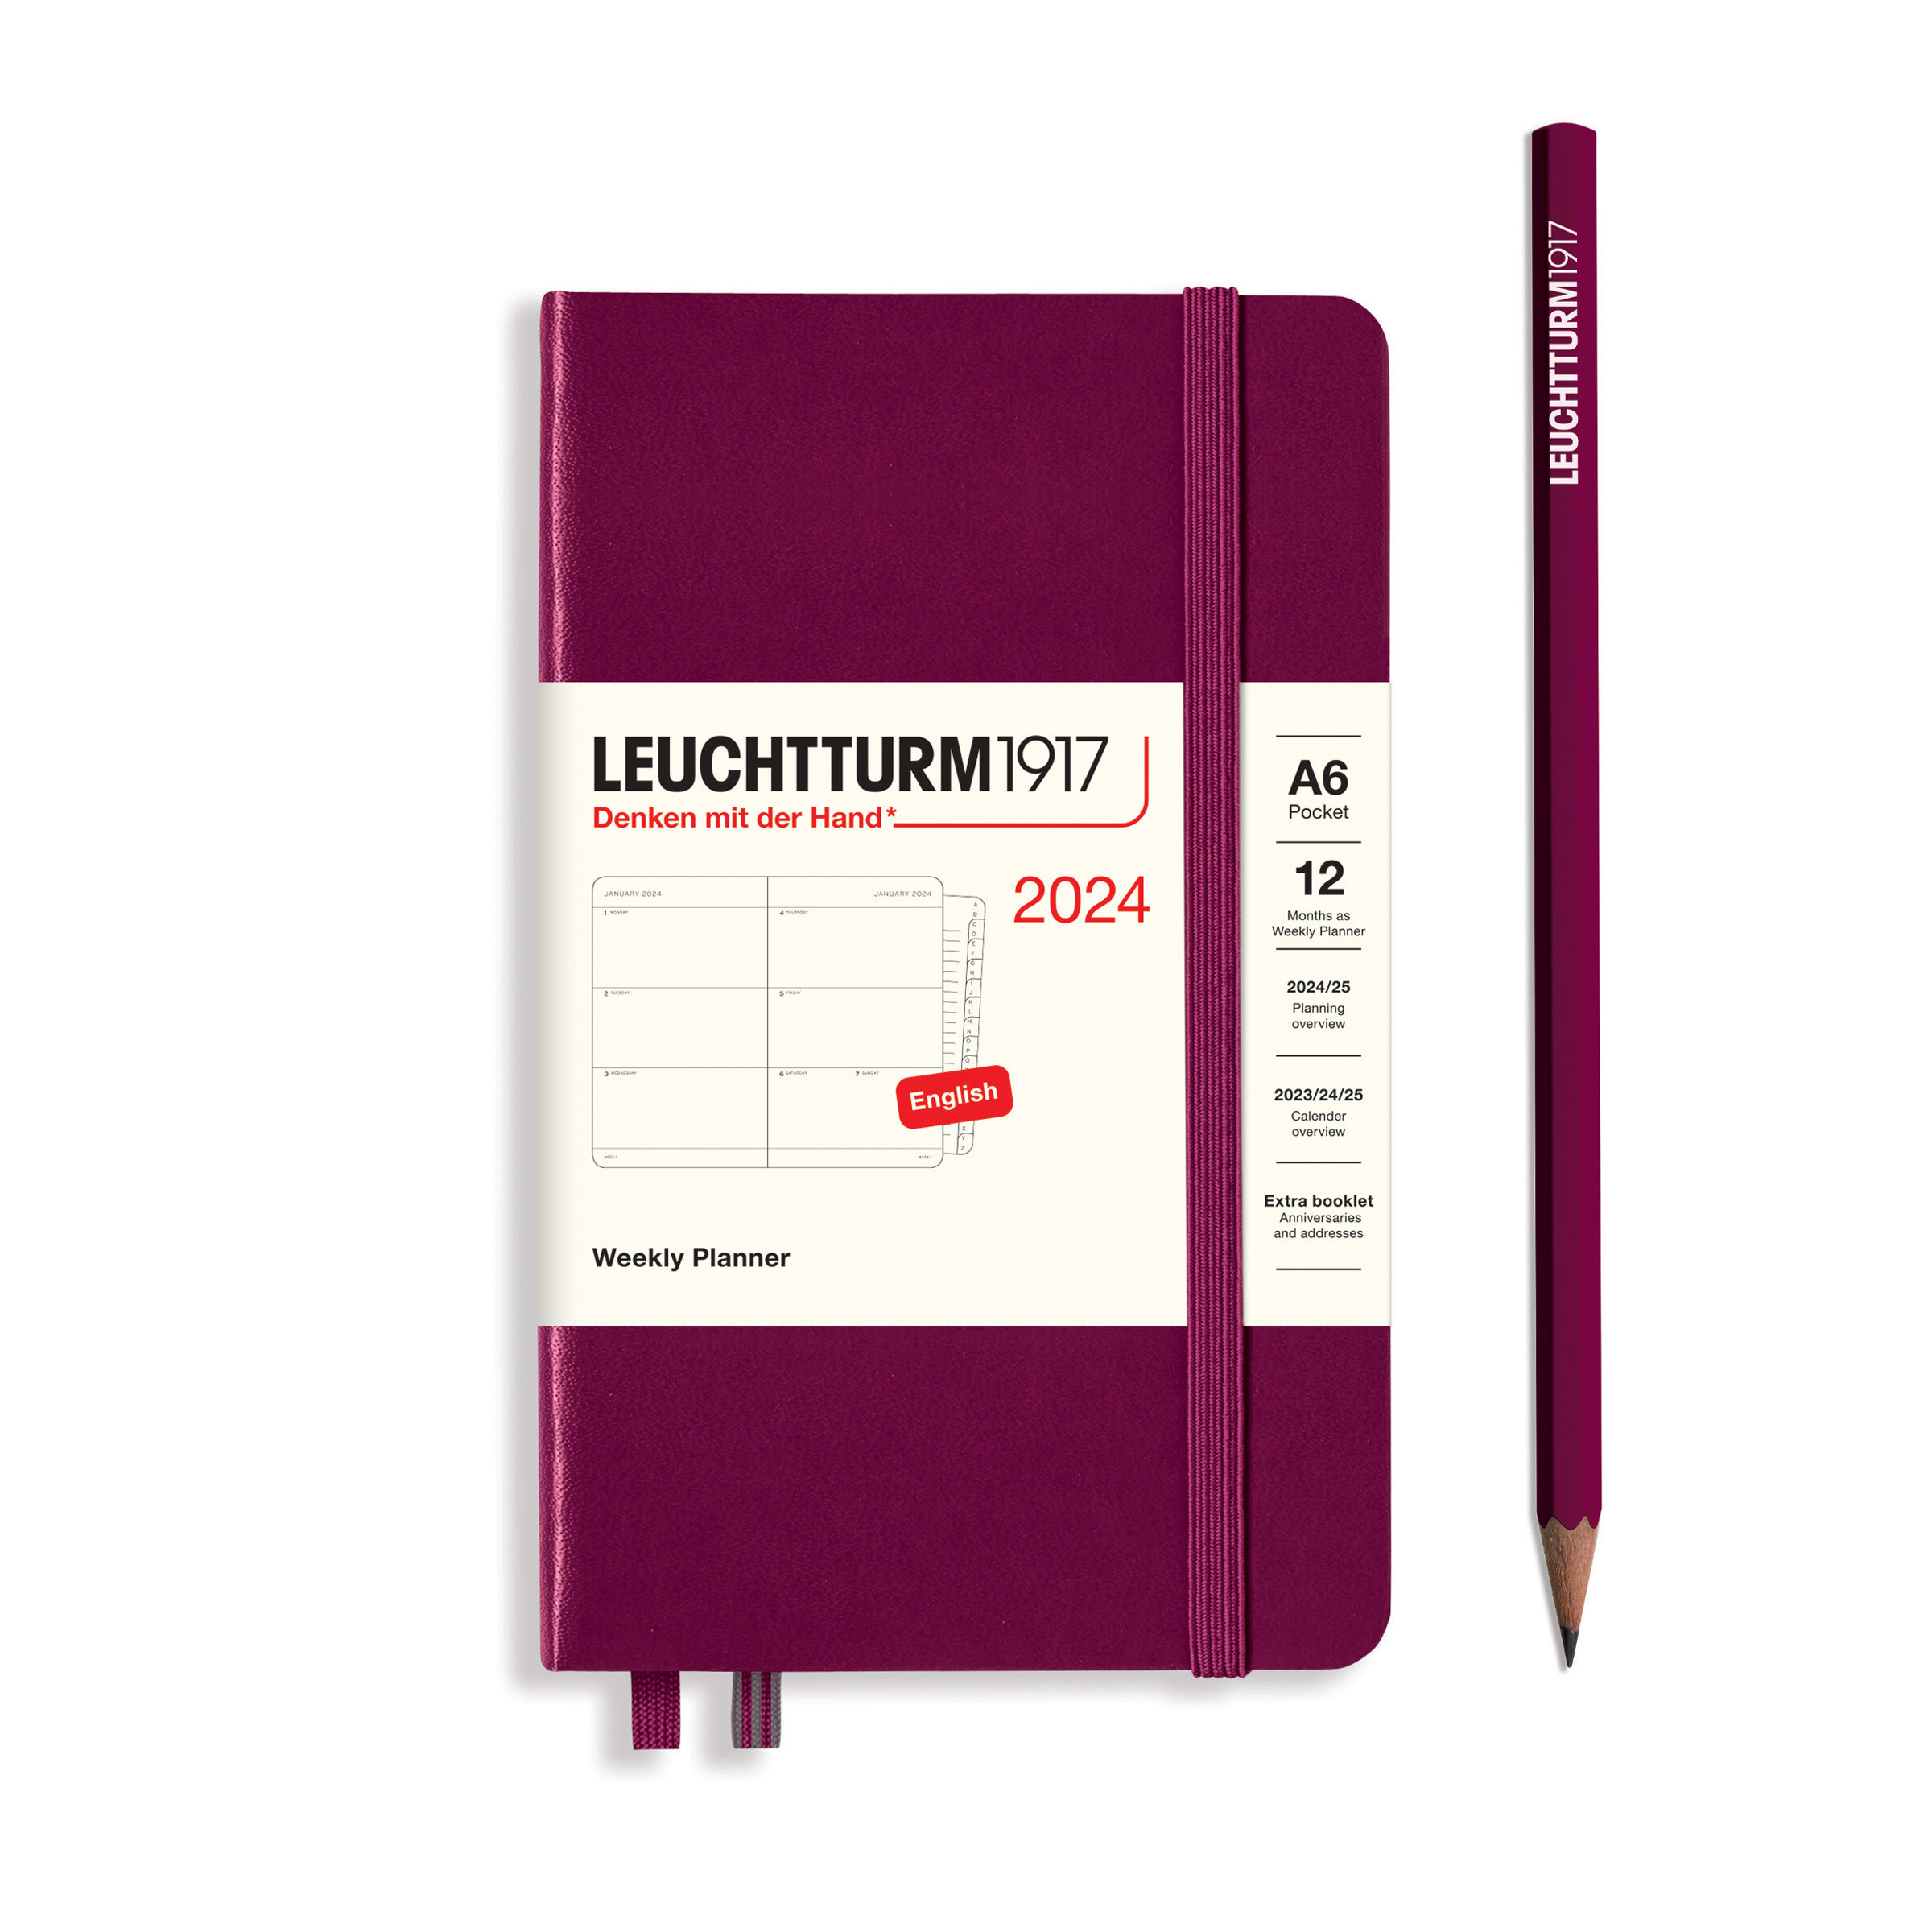 Leuchtturm1917 Weekly Planner Hard Cover Pocket A6 2024 - Pencraft the boutique